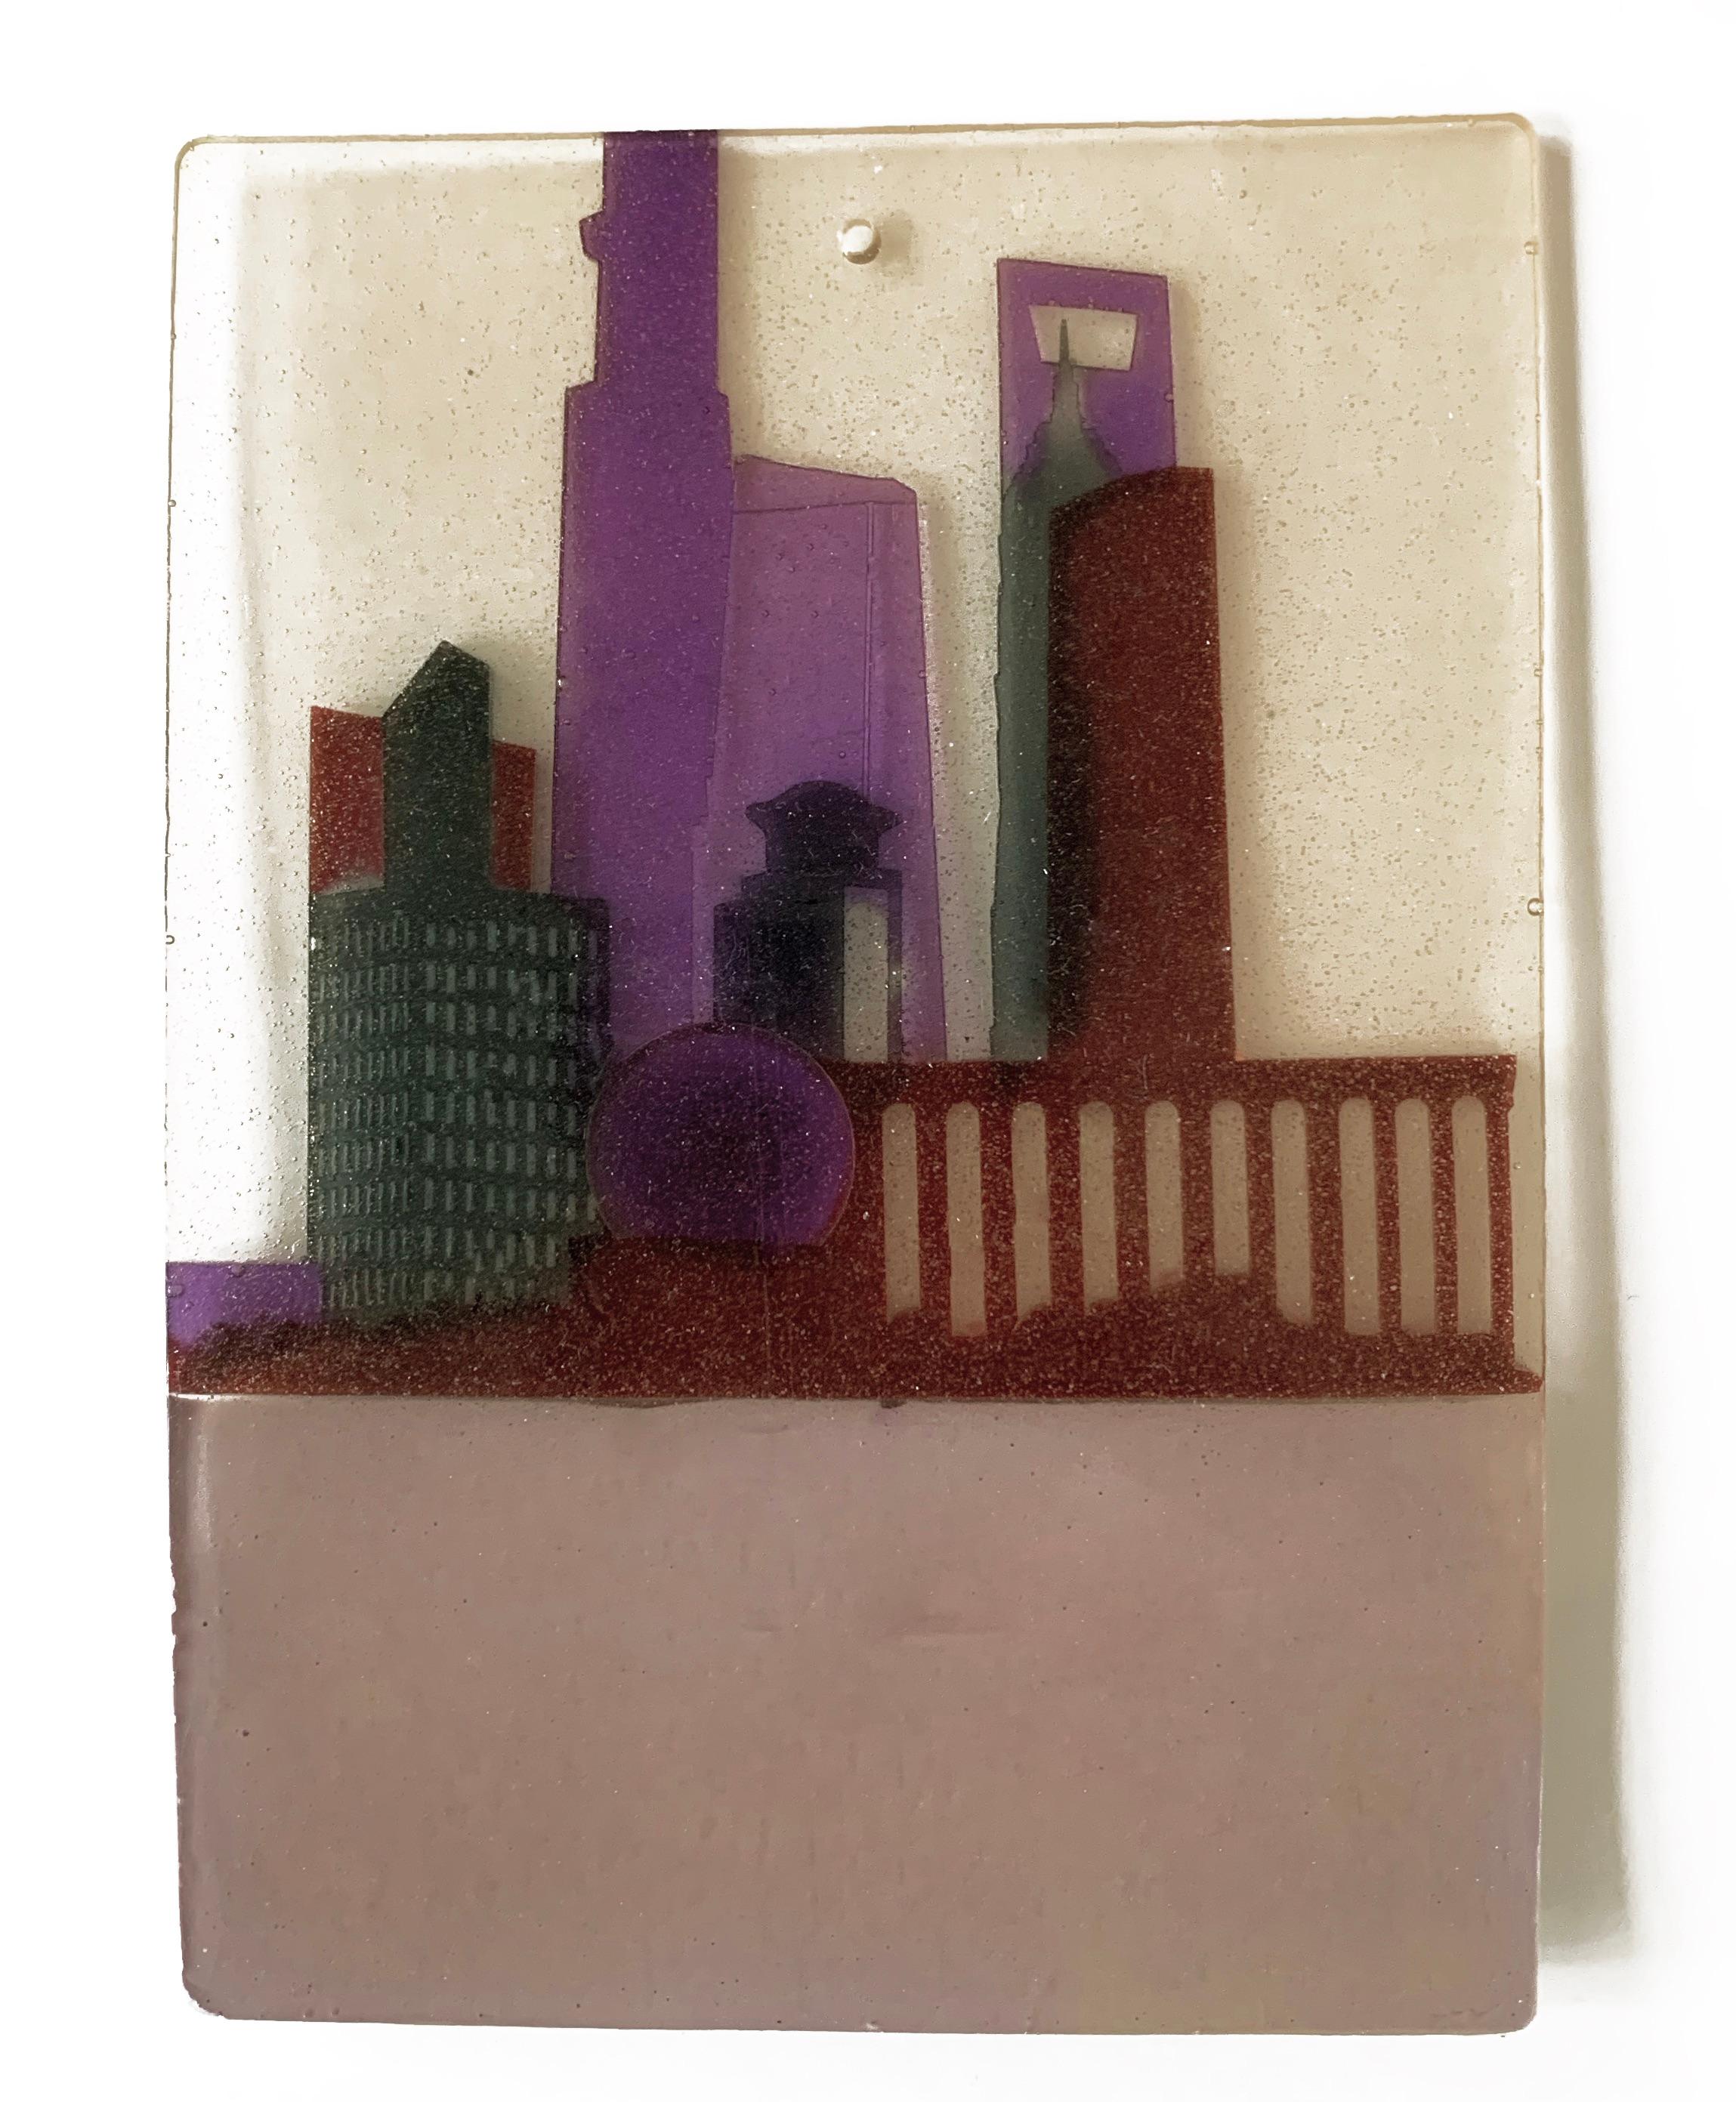 Hand-Crafted Gaetano Pesce Resin Invitations, Set of 2 with Dramatic Cityscapes